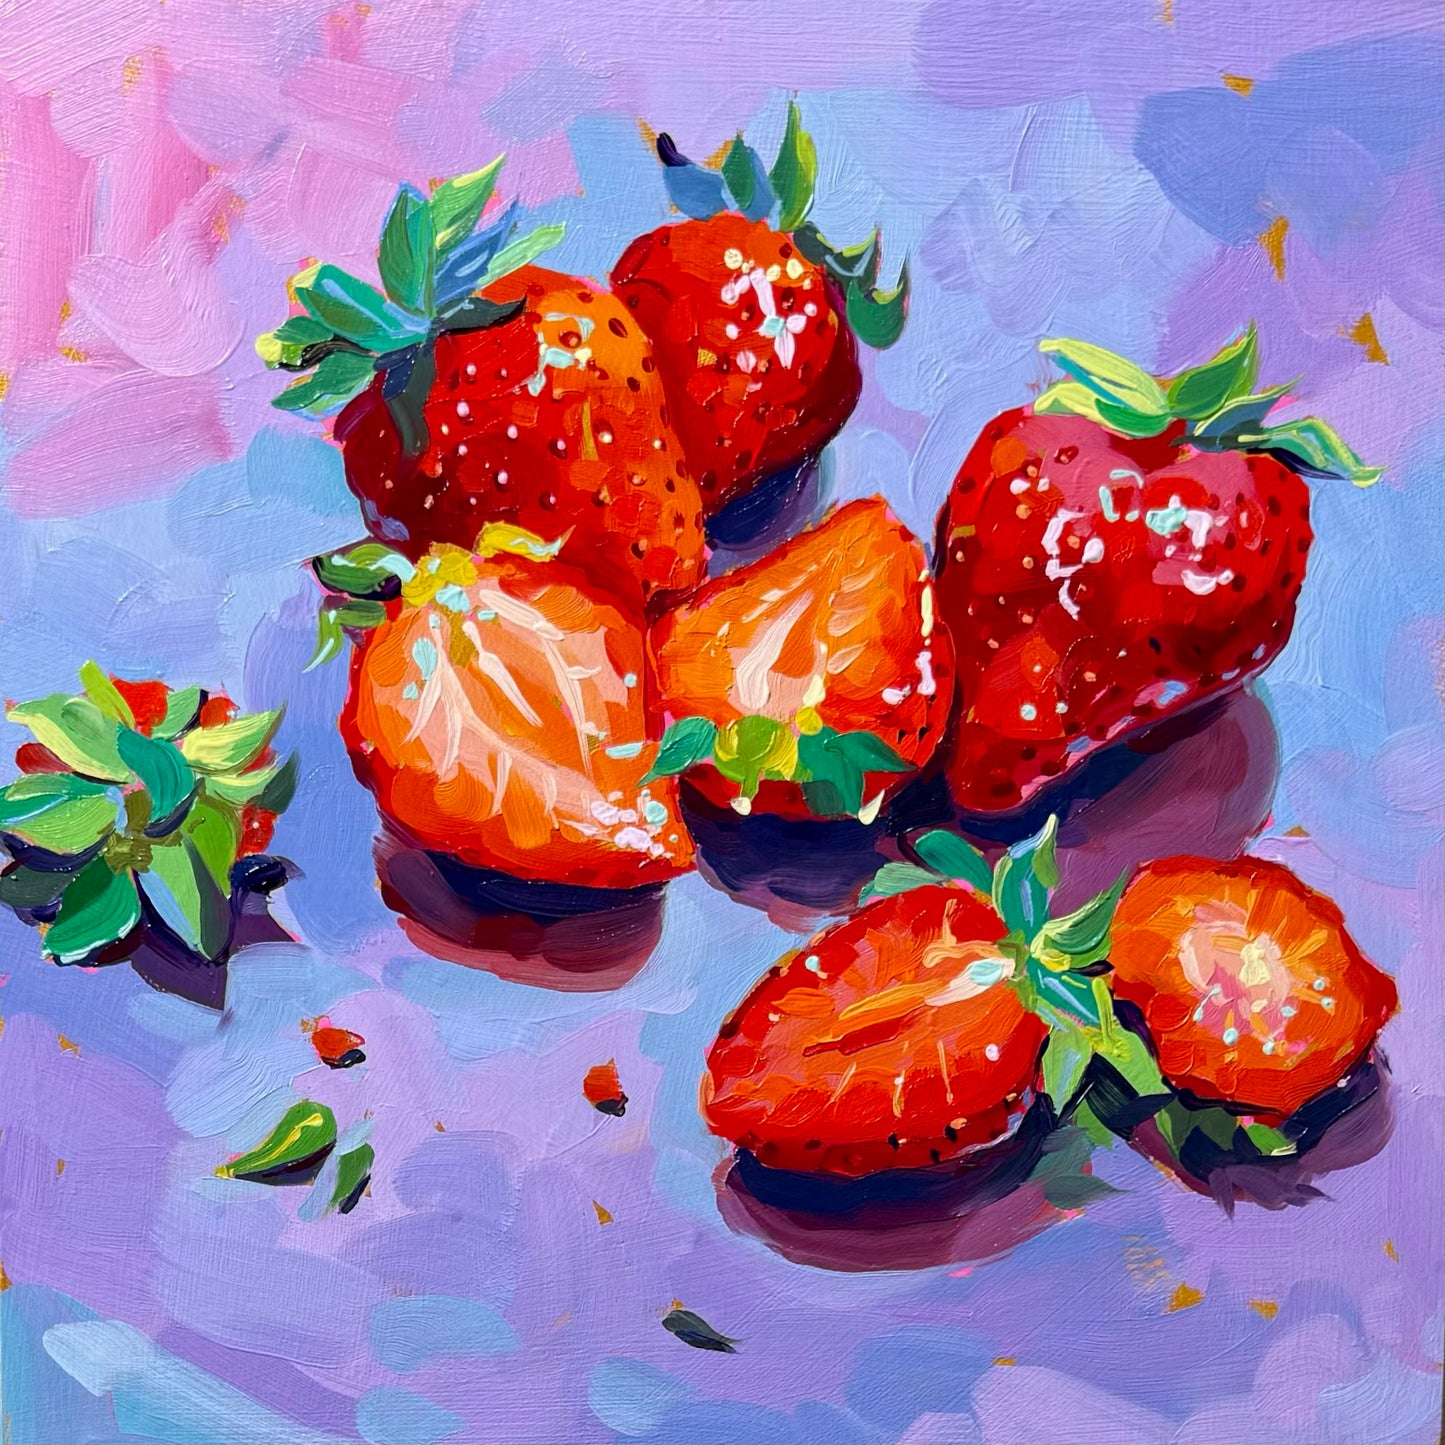 Sparkly strawberries - Original Oil Painting